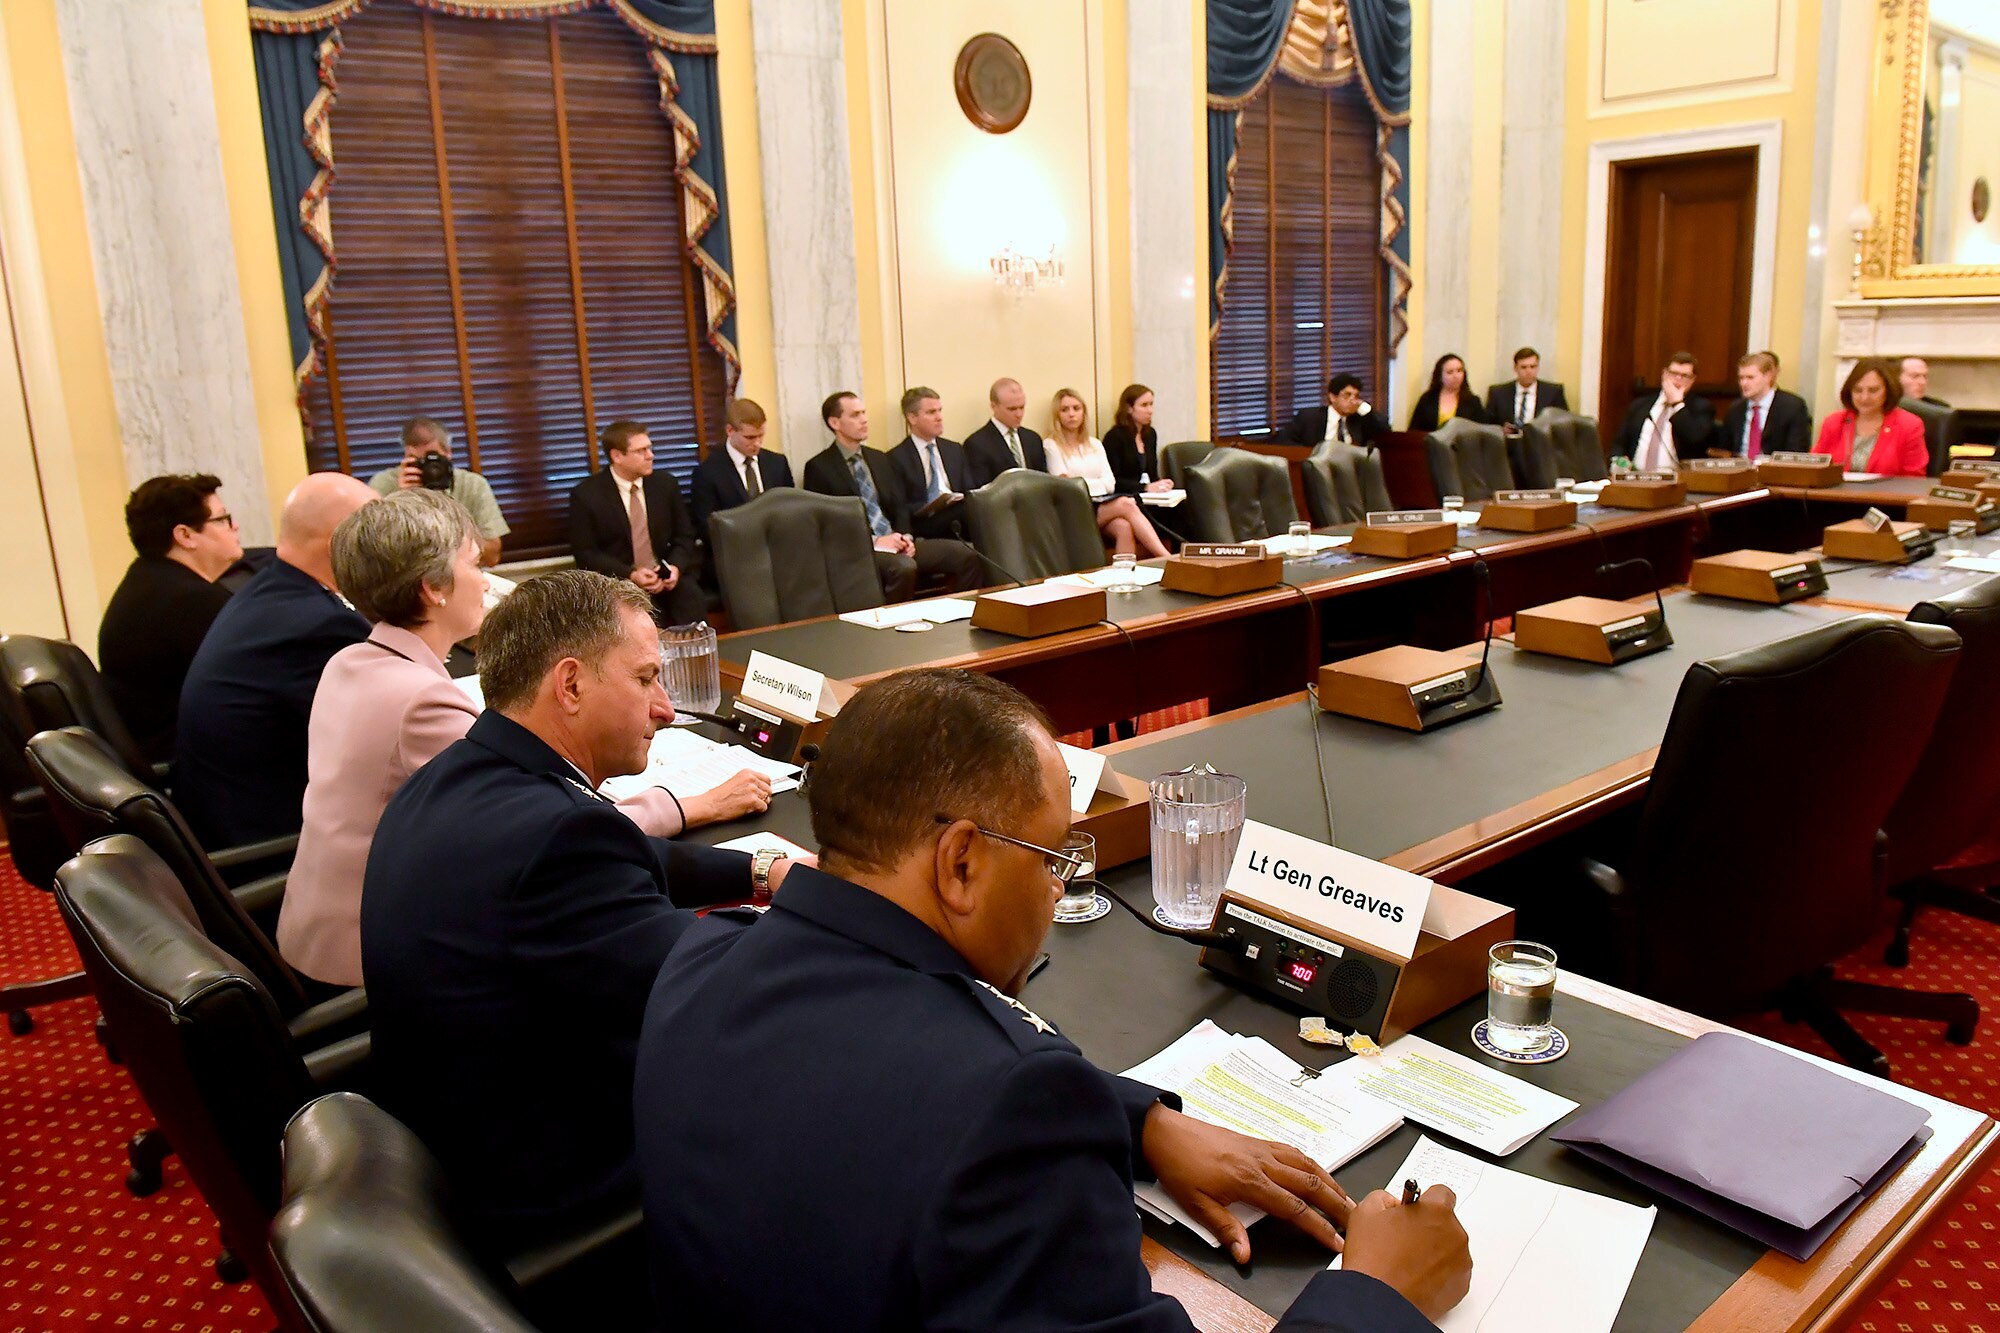 Secretary of the Air Force Heather Wilson and Air Force Chief of Staff Gen. David Goldfein testify before the Senate Armed Services Subcommittee on Strategic Forces May 17, 2017, in Washington, D.C. With Wilson and Goldfein were Lt. Gen. Samuel Greaves, the Space and Missile Systems Center commander; Gen. John Raymond, the Air Force Space Command commander and Cristina Chapin, the General Accounting Office director of acquisition and sourcing management. The committee examined military space organization, policy, and programs. (U.S. Air Force photo/Scott M. Ash)